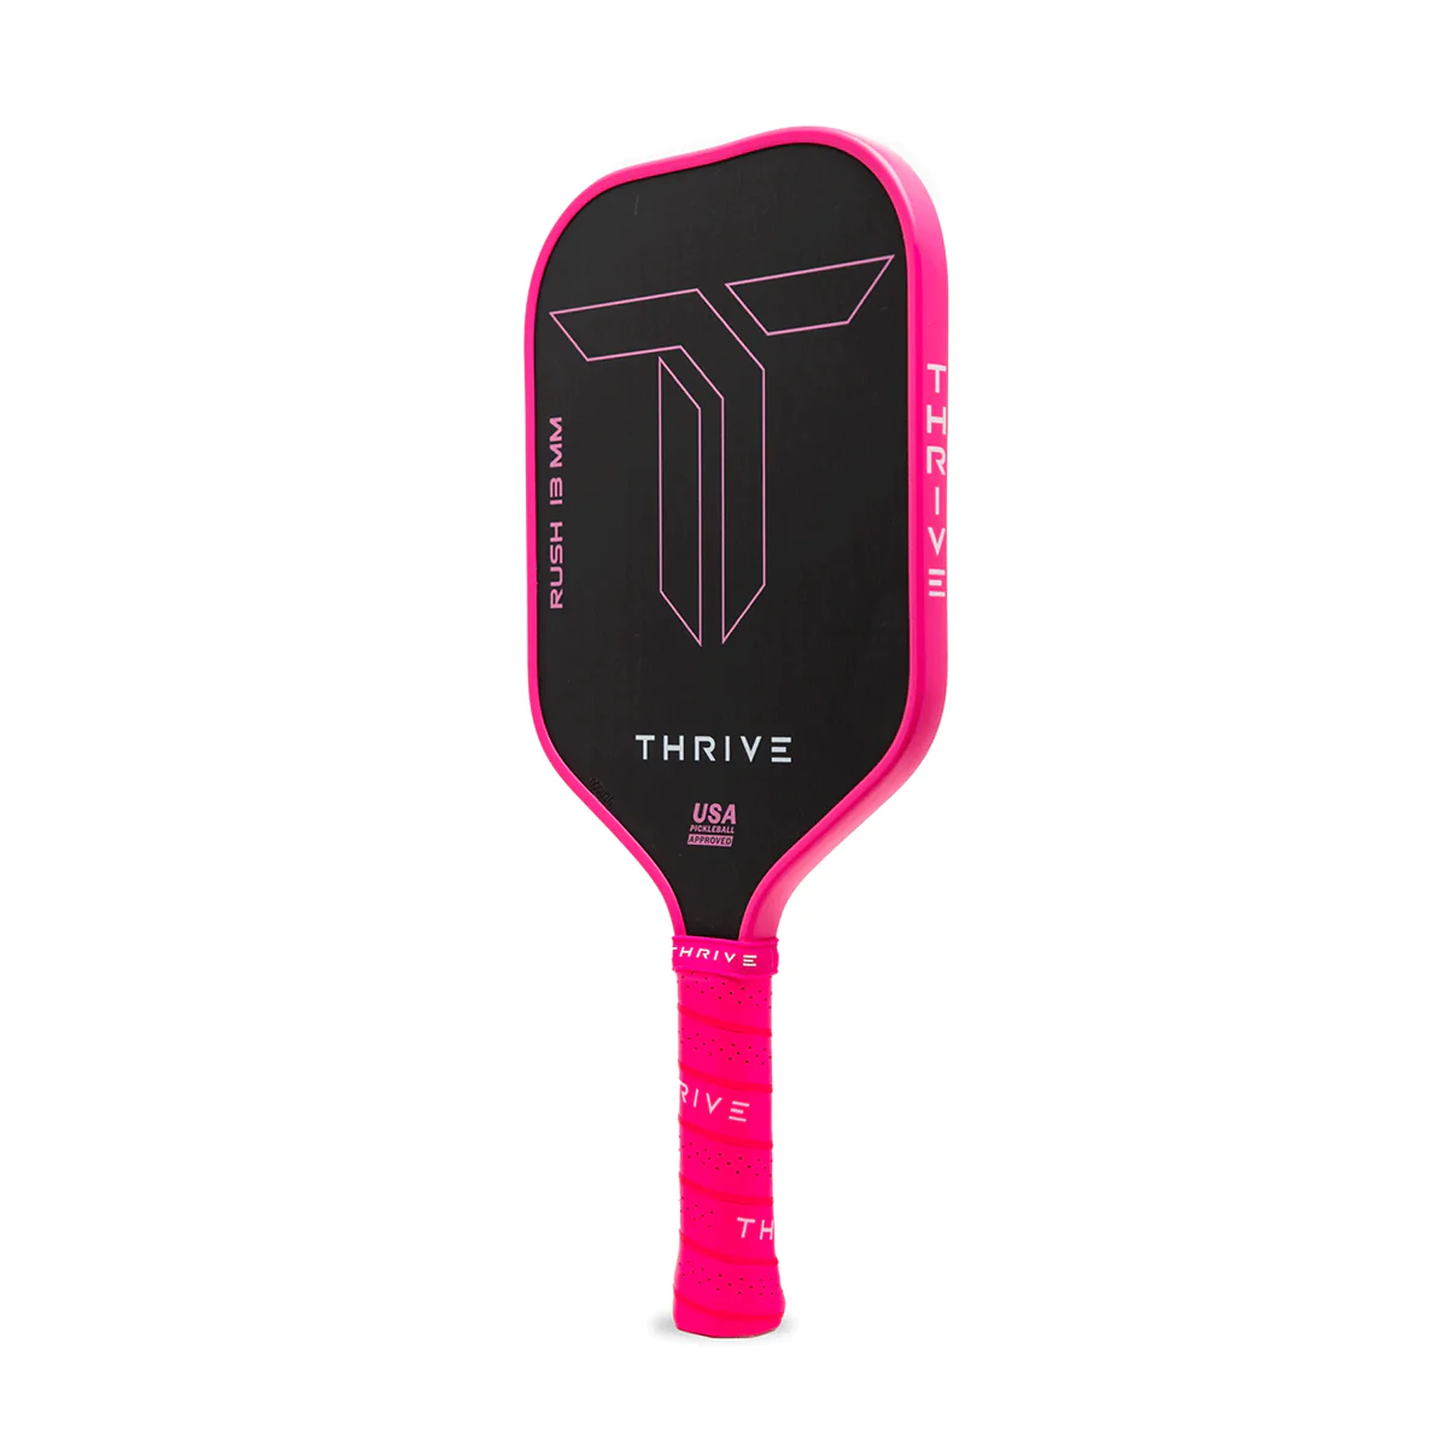 RUSH 13 (PINK)  Includes custom weight card, paddle cover, paddle eraser, and lead weights.